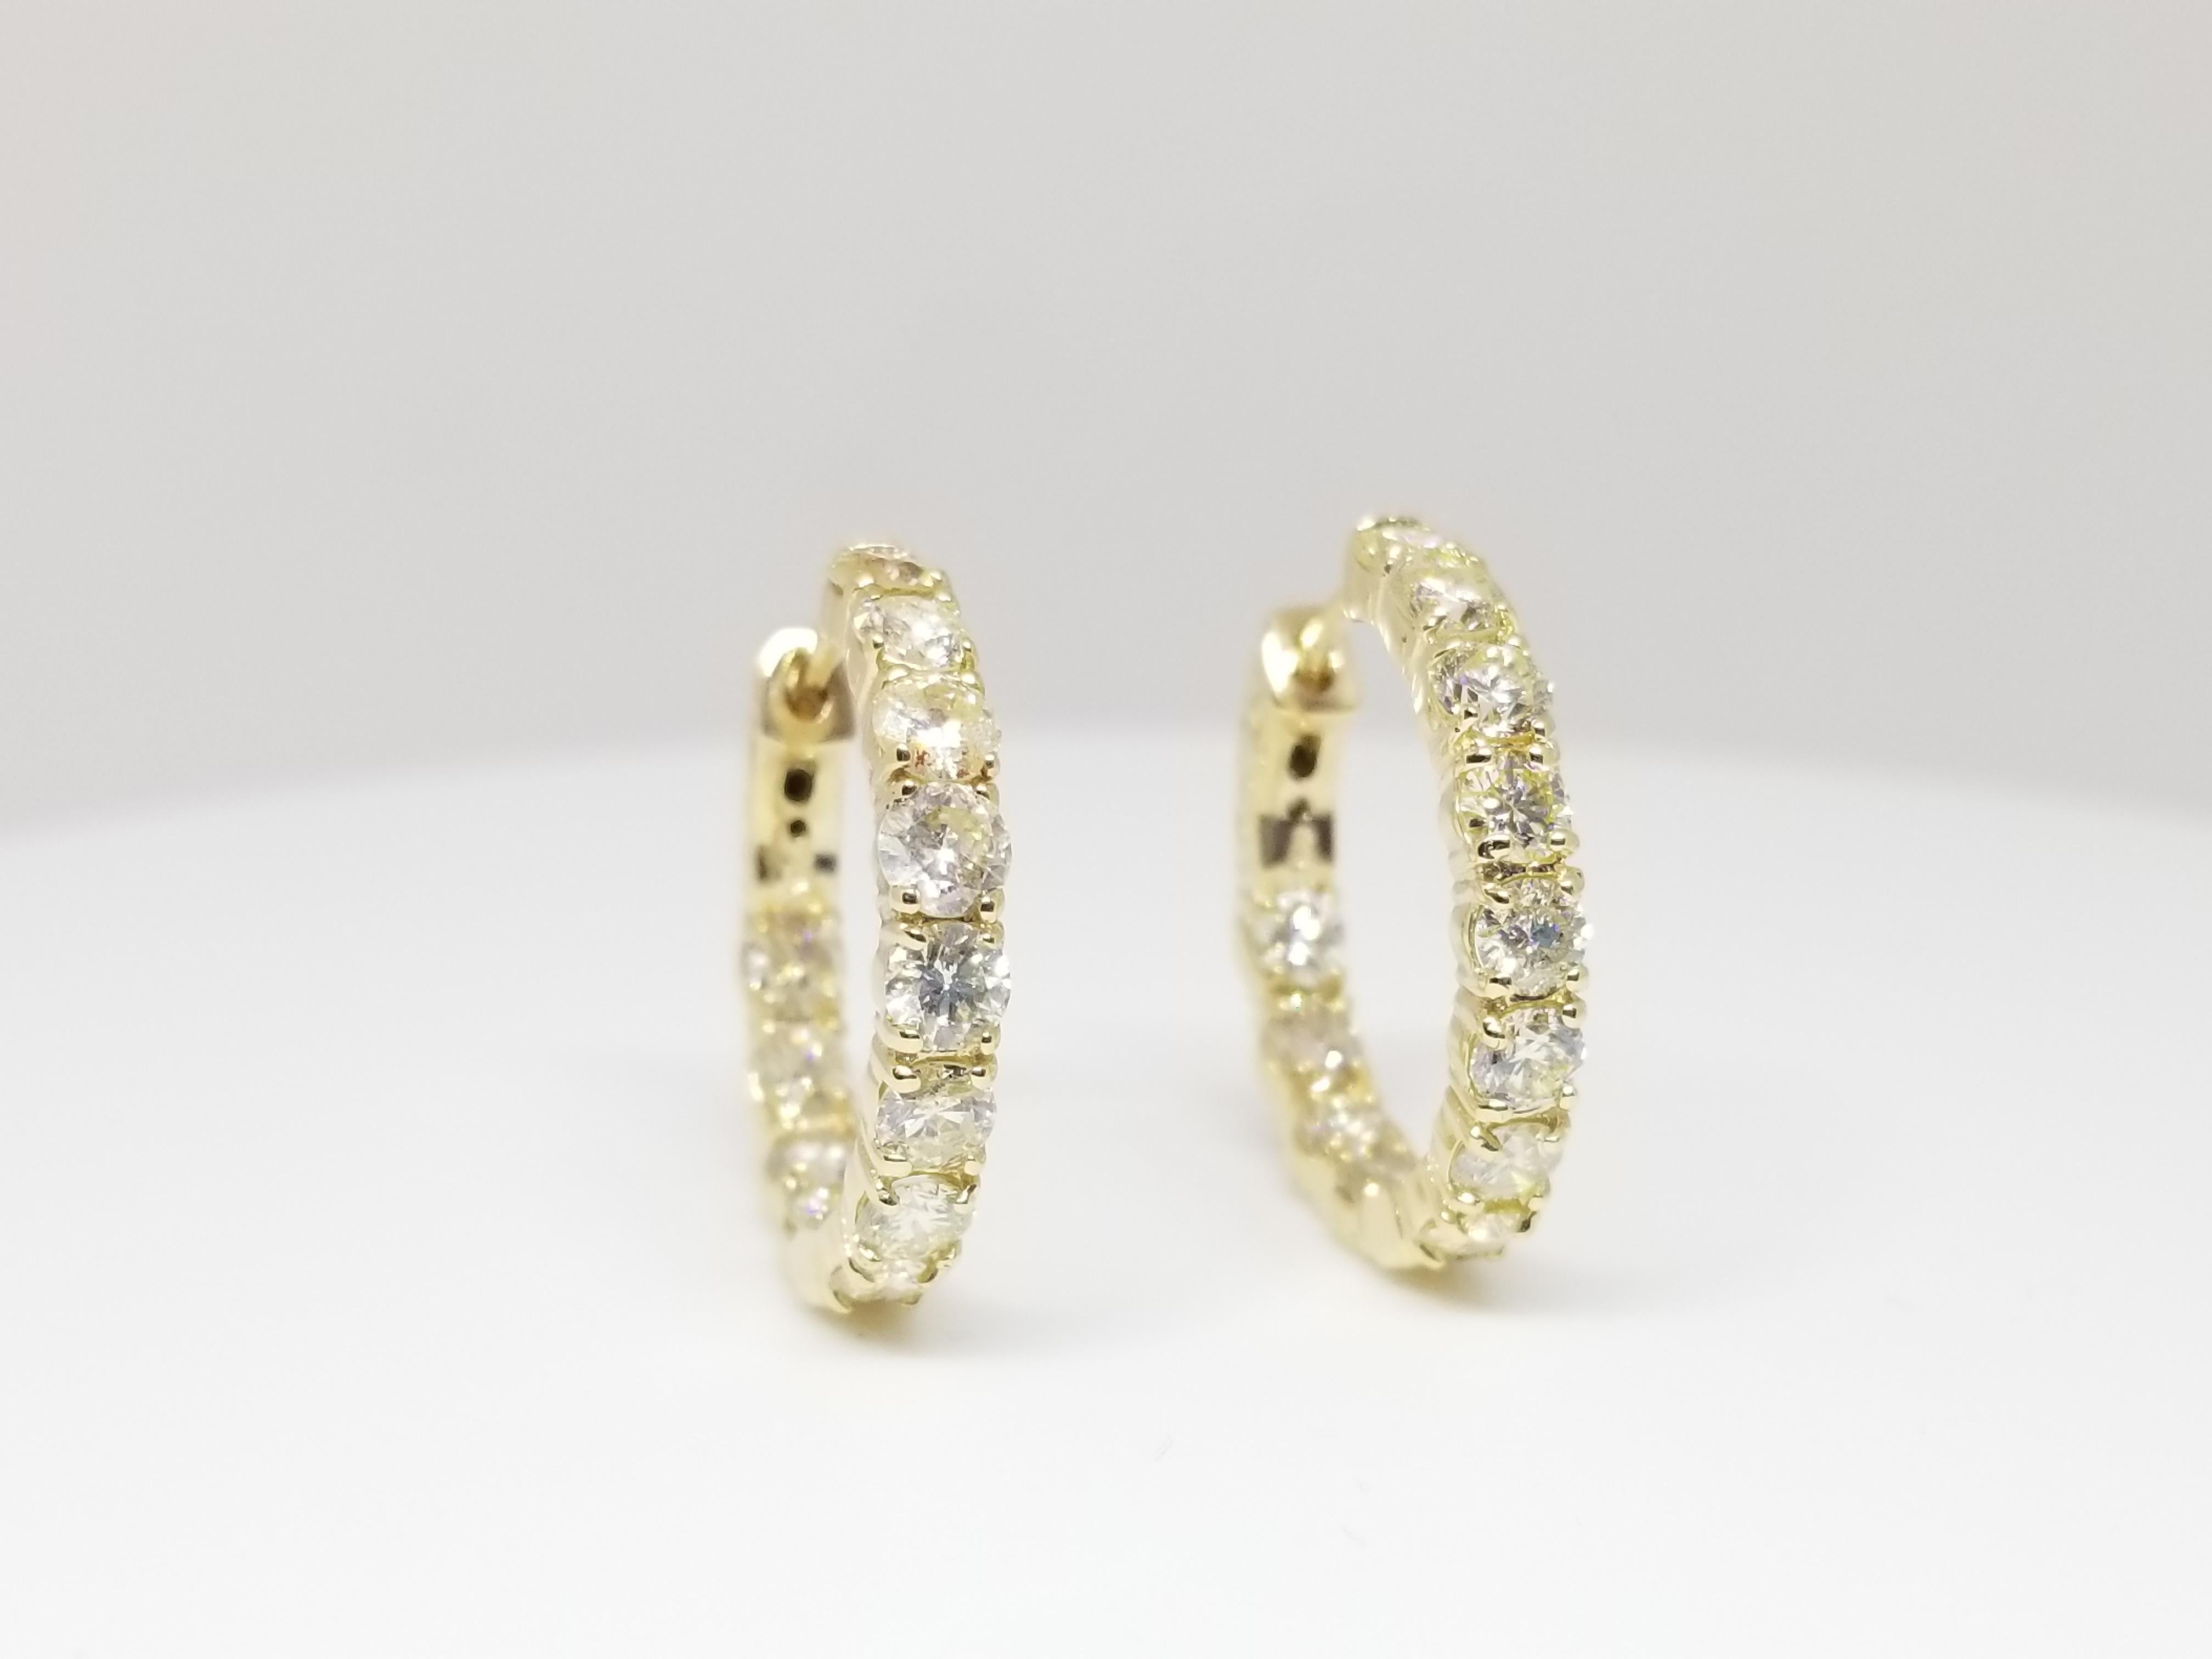 Beautiful pair of huggie diamond inside out hoop earrings available in 14k yellow gold. Secures with snap closure for wear.  Measures 3/4 inch or 2mm in diameter. Beautiful stock for the holiday!